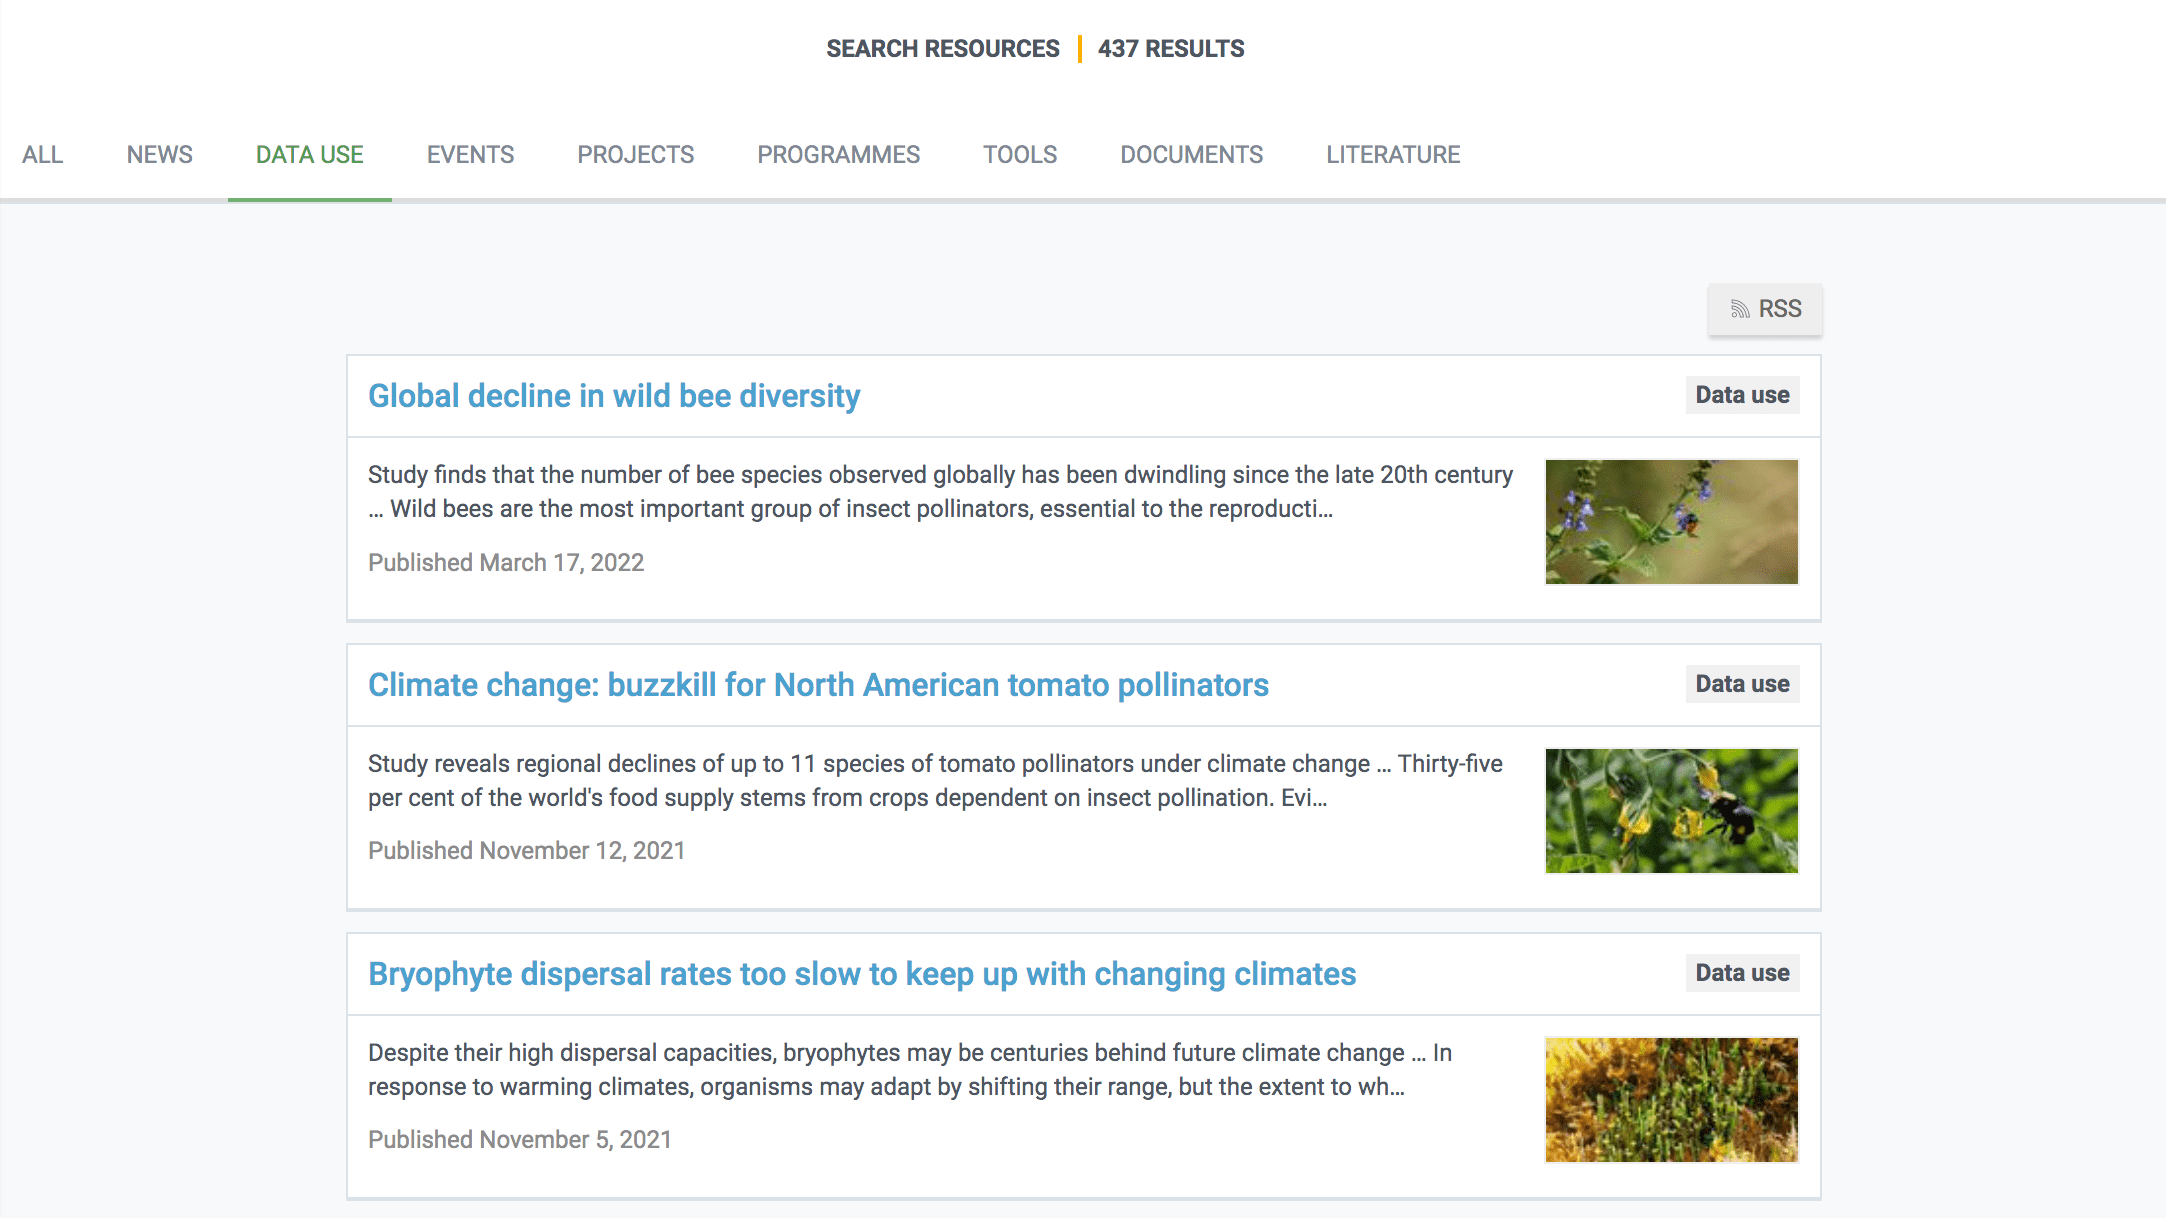 Image showing the Data use tab in the Resources section of GBIF. The articles shown on the page are titled “Global decline in wild bee diversity,” “Climate change: buzzkill for North American tomato pollinators,” and “Bryophyte dispersal rates too slow to keep up with changing climates”.